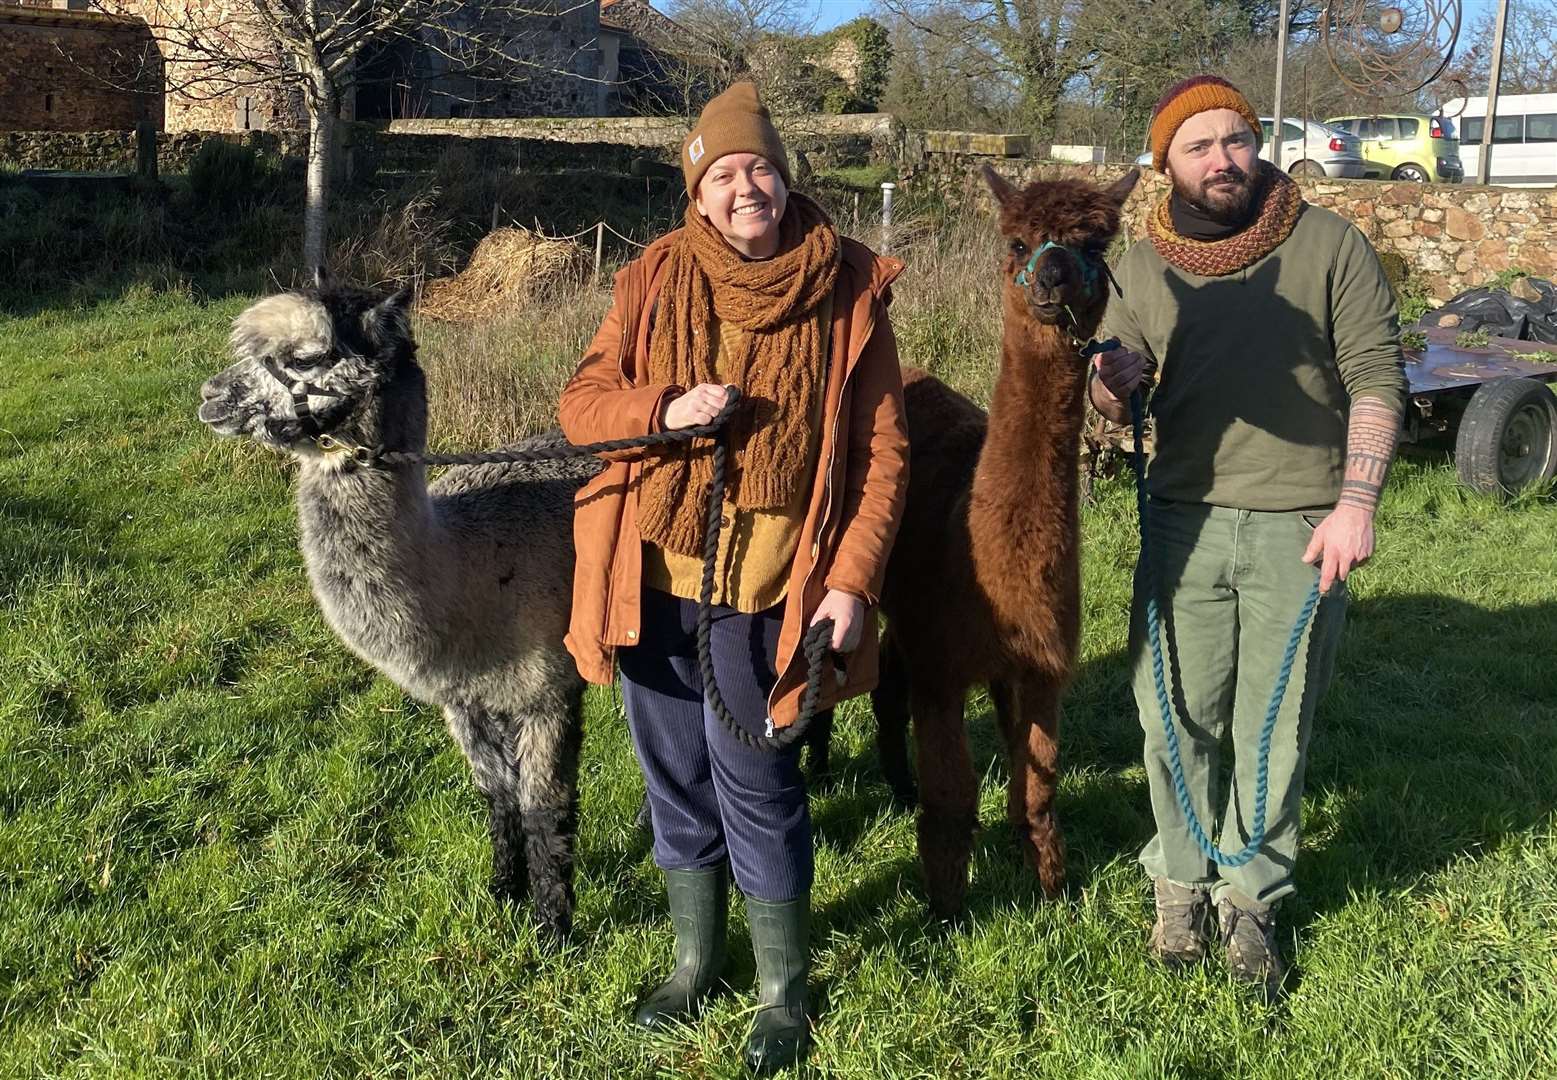 Carole and Elie on the farm which offers walks, picnics and the chance to feed the animals